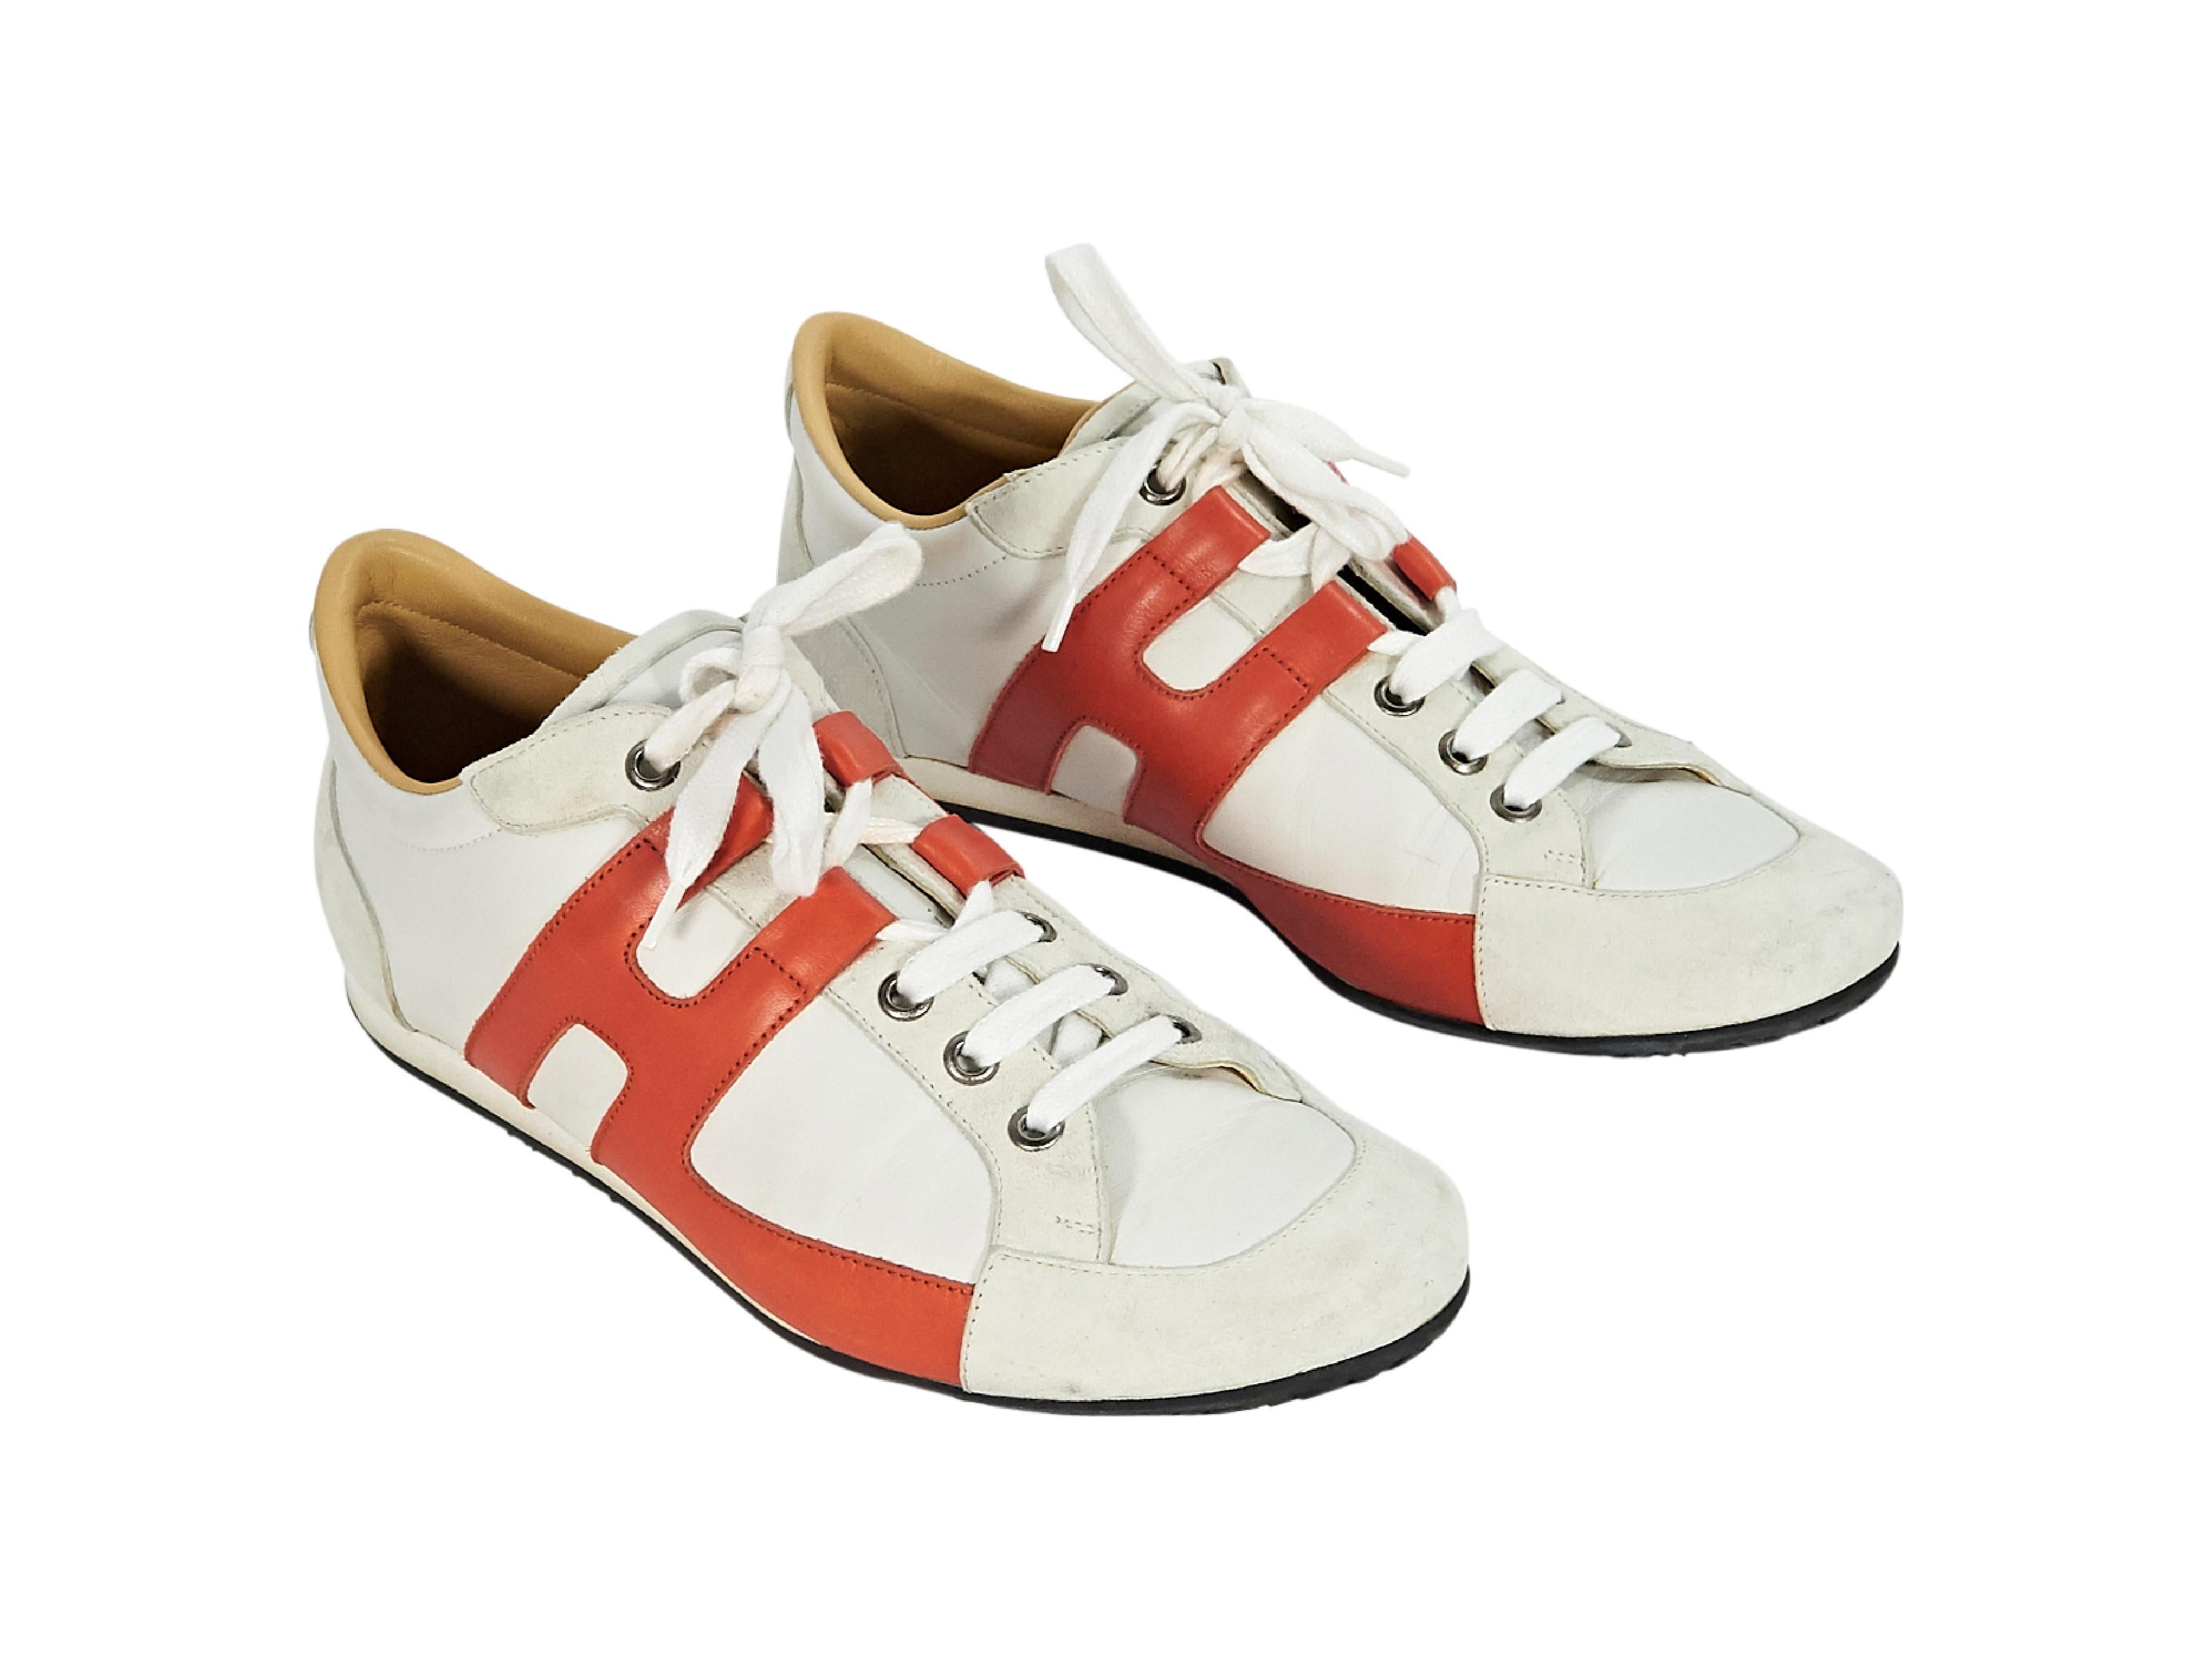 Product details:  White and orange leather sneakers by Hermes.  Trimmed with suede.  Lace-up closure.  Round toe. 
Condition: Pre-owned. Good. 
Est. Retail $ 1,125.00